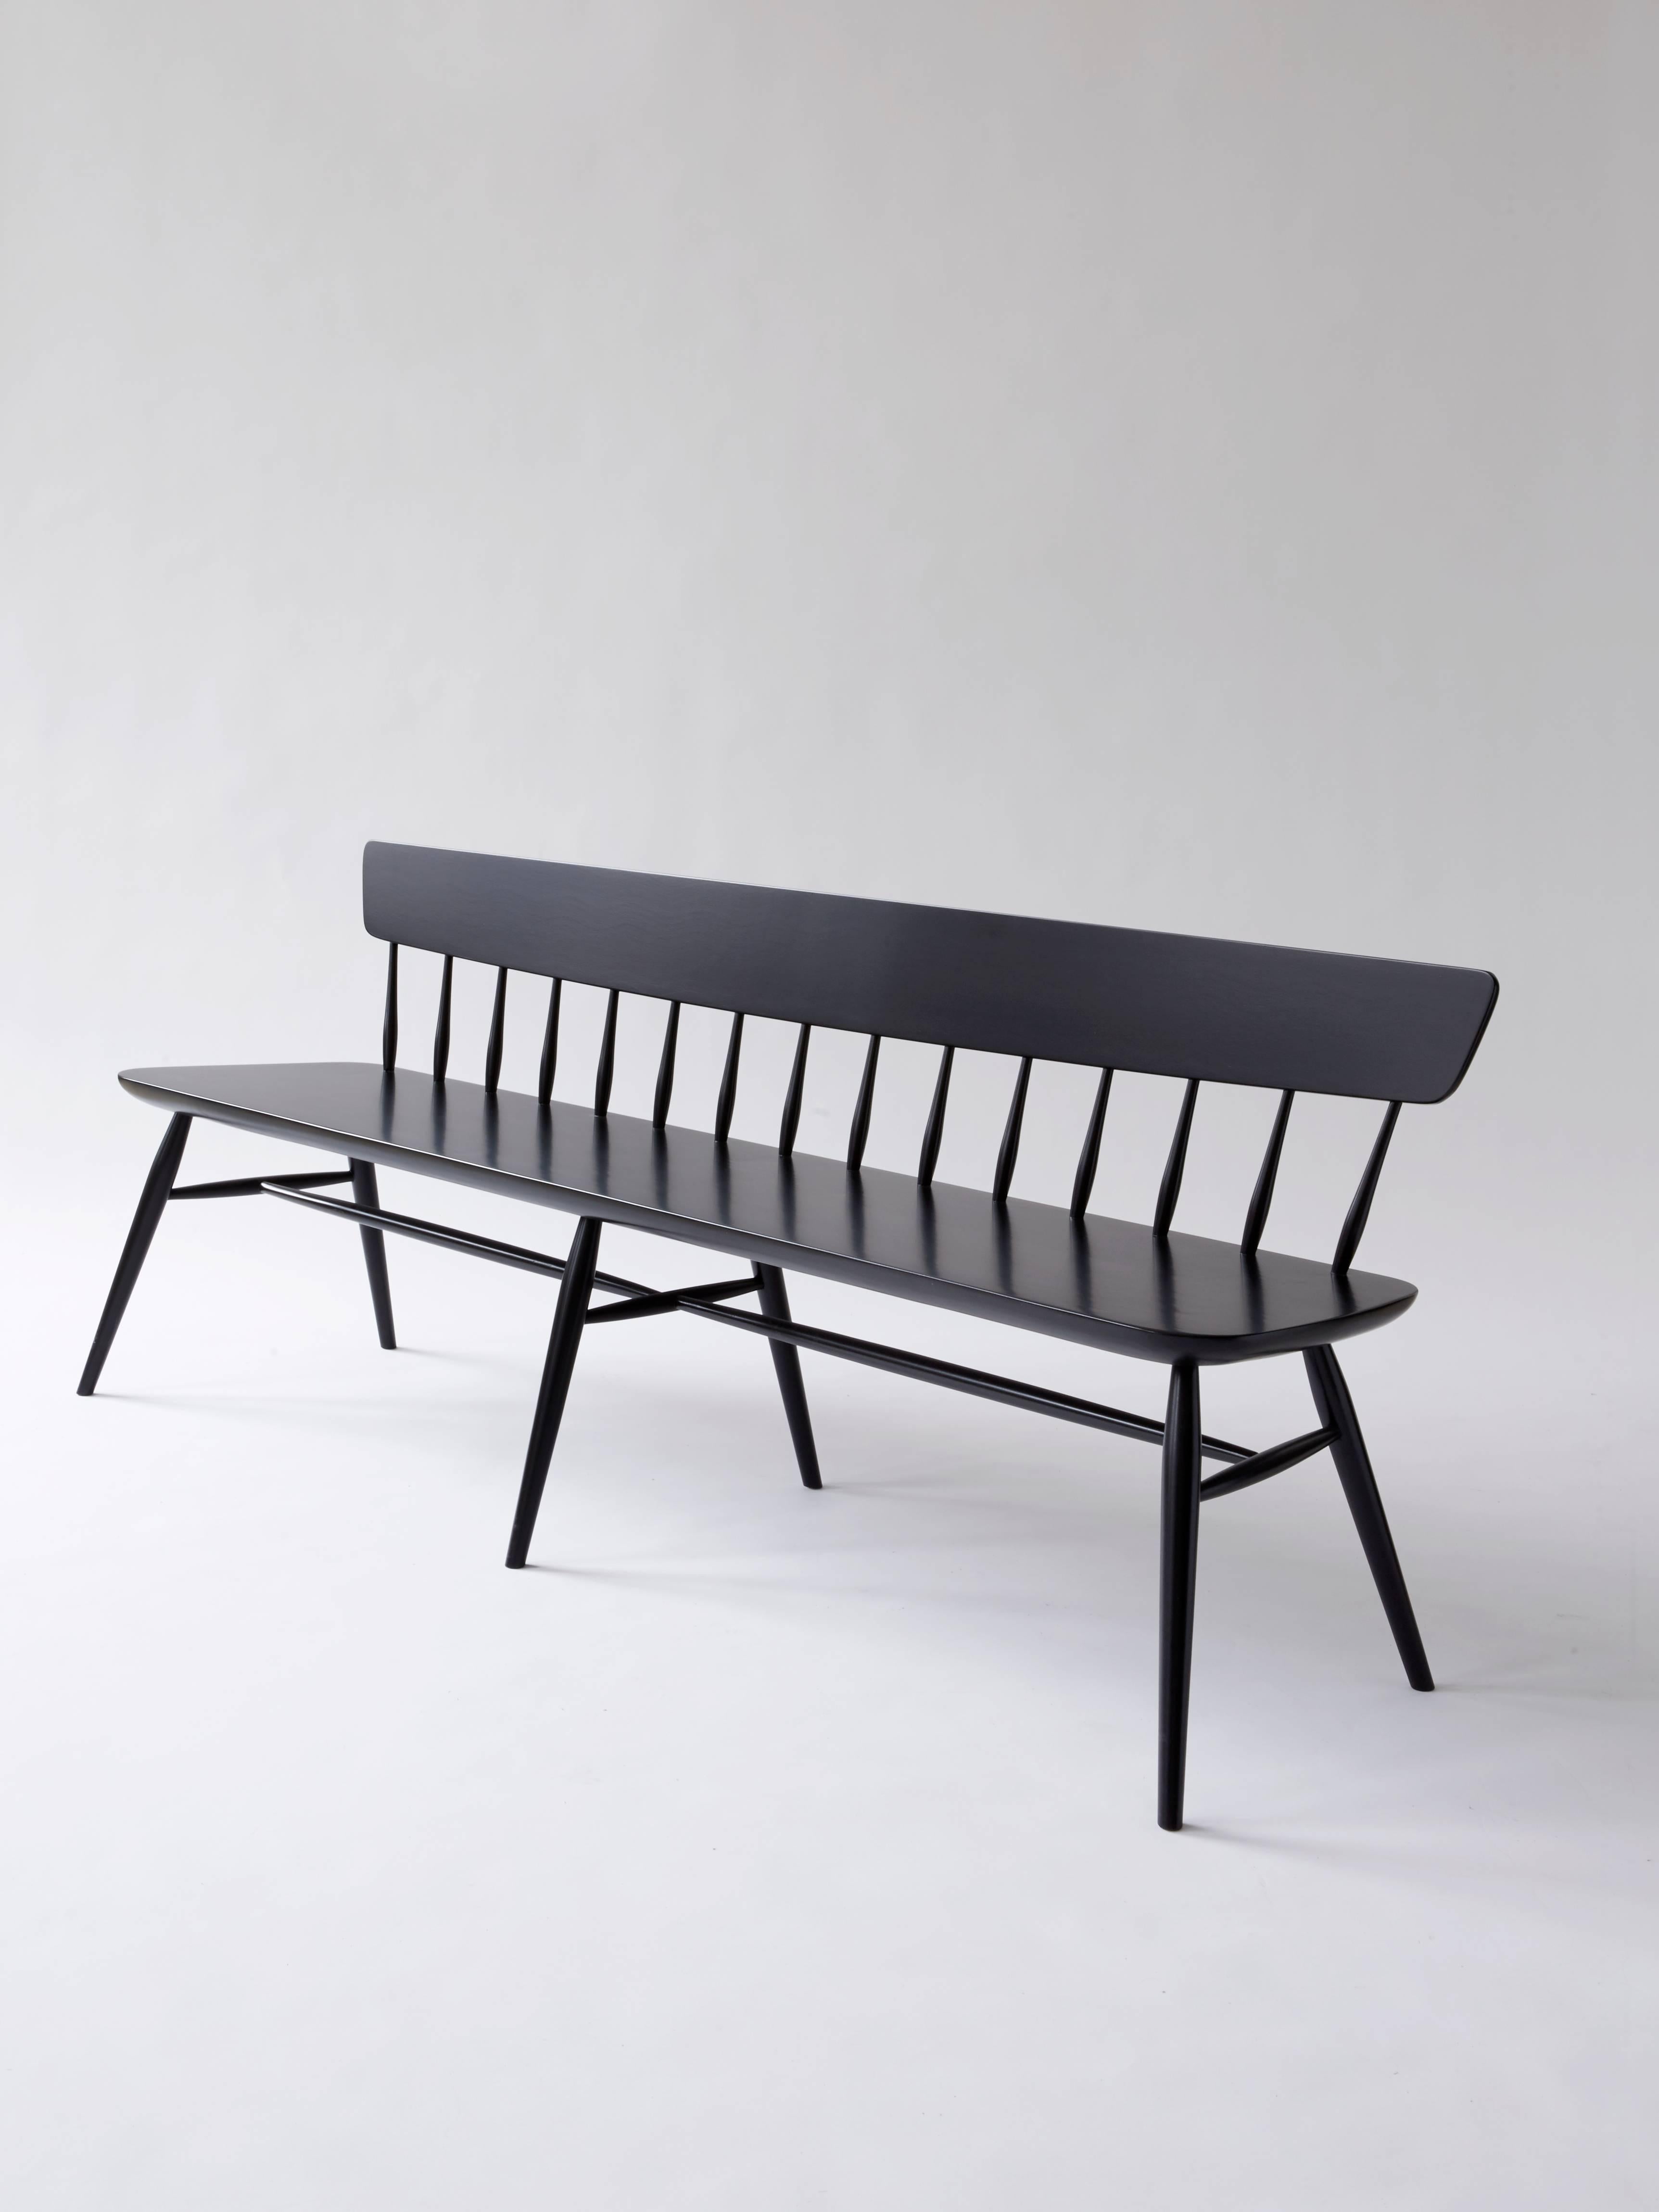 Not So General Gallery in Los Angeles is proud to present the Windsor Bench.

This contemporary take on a traditional bench comes from Brooklyn-based design practice, Moving Mountains. The exaggerated proportions, unexpected curves and matte lacquer